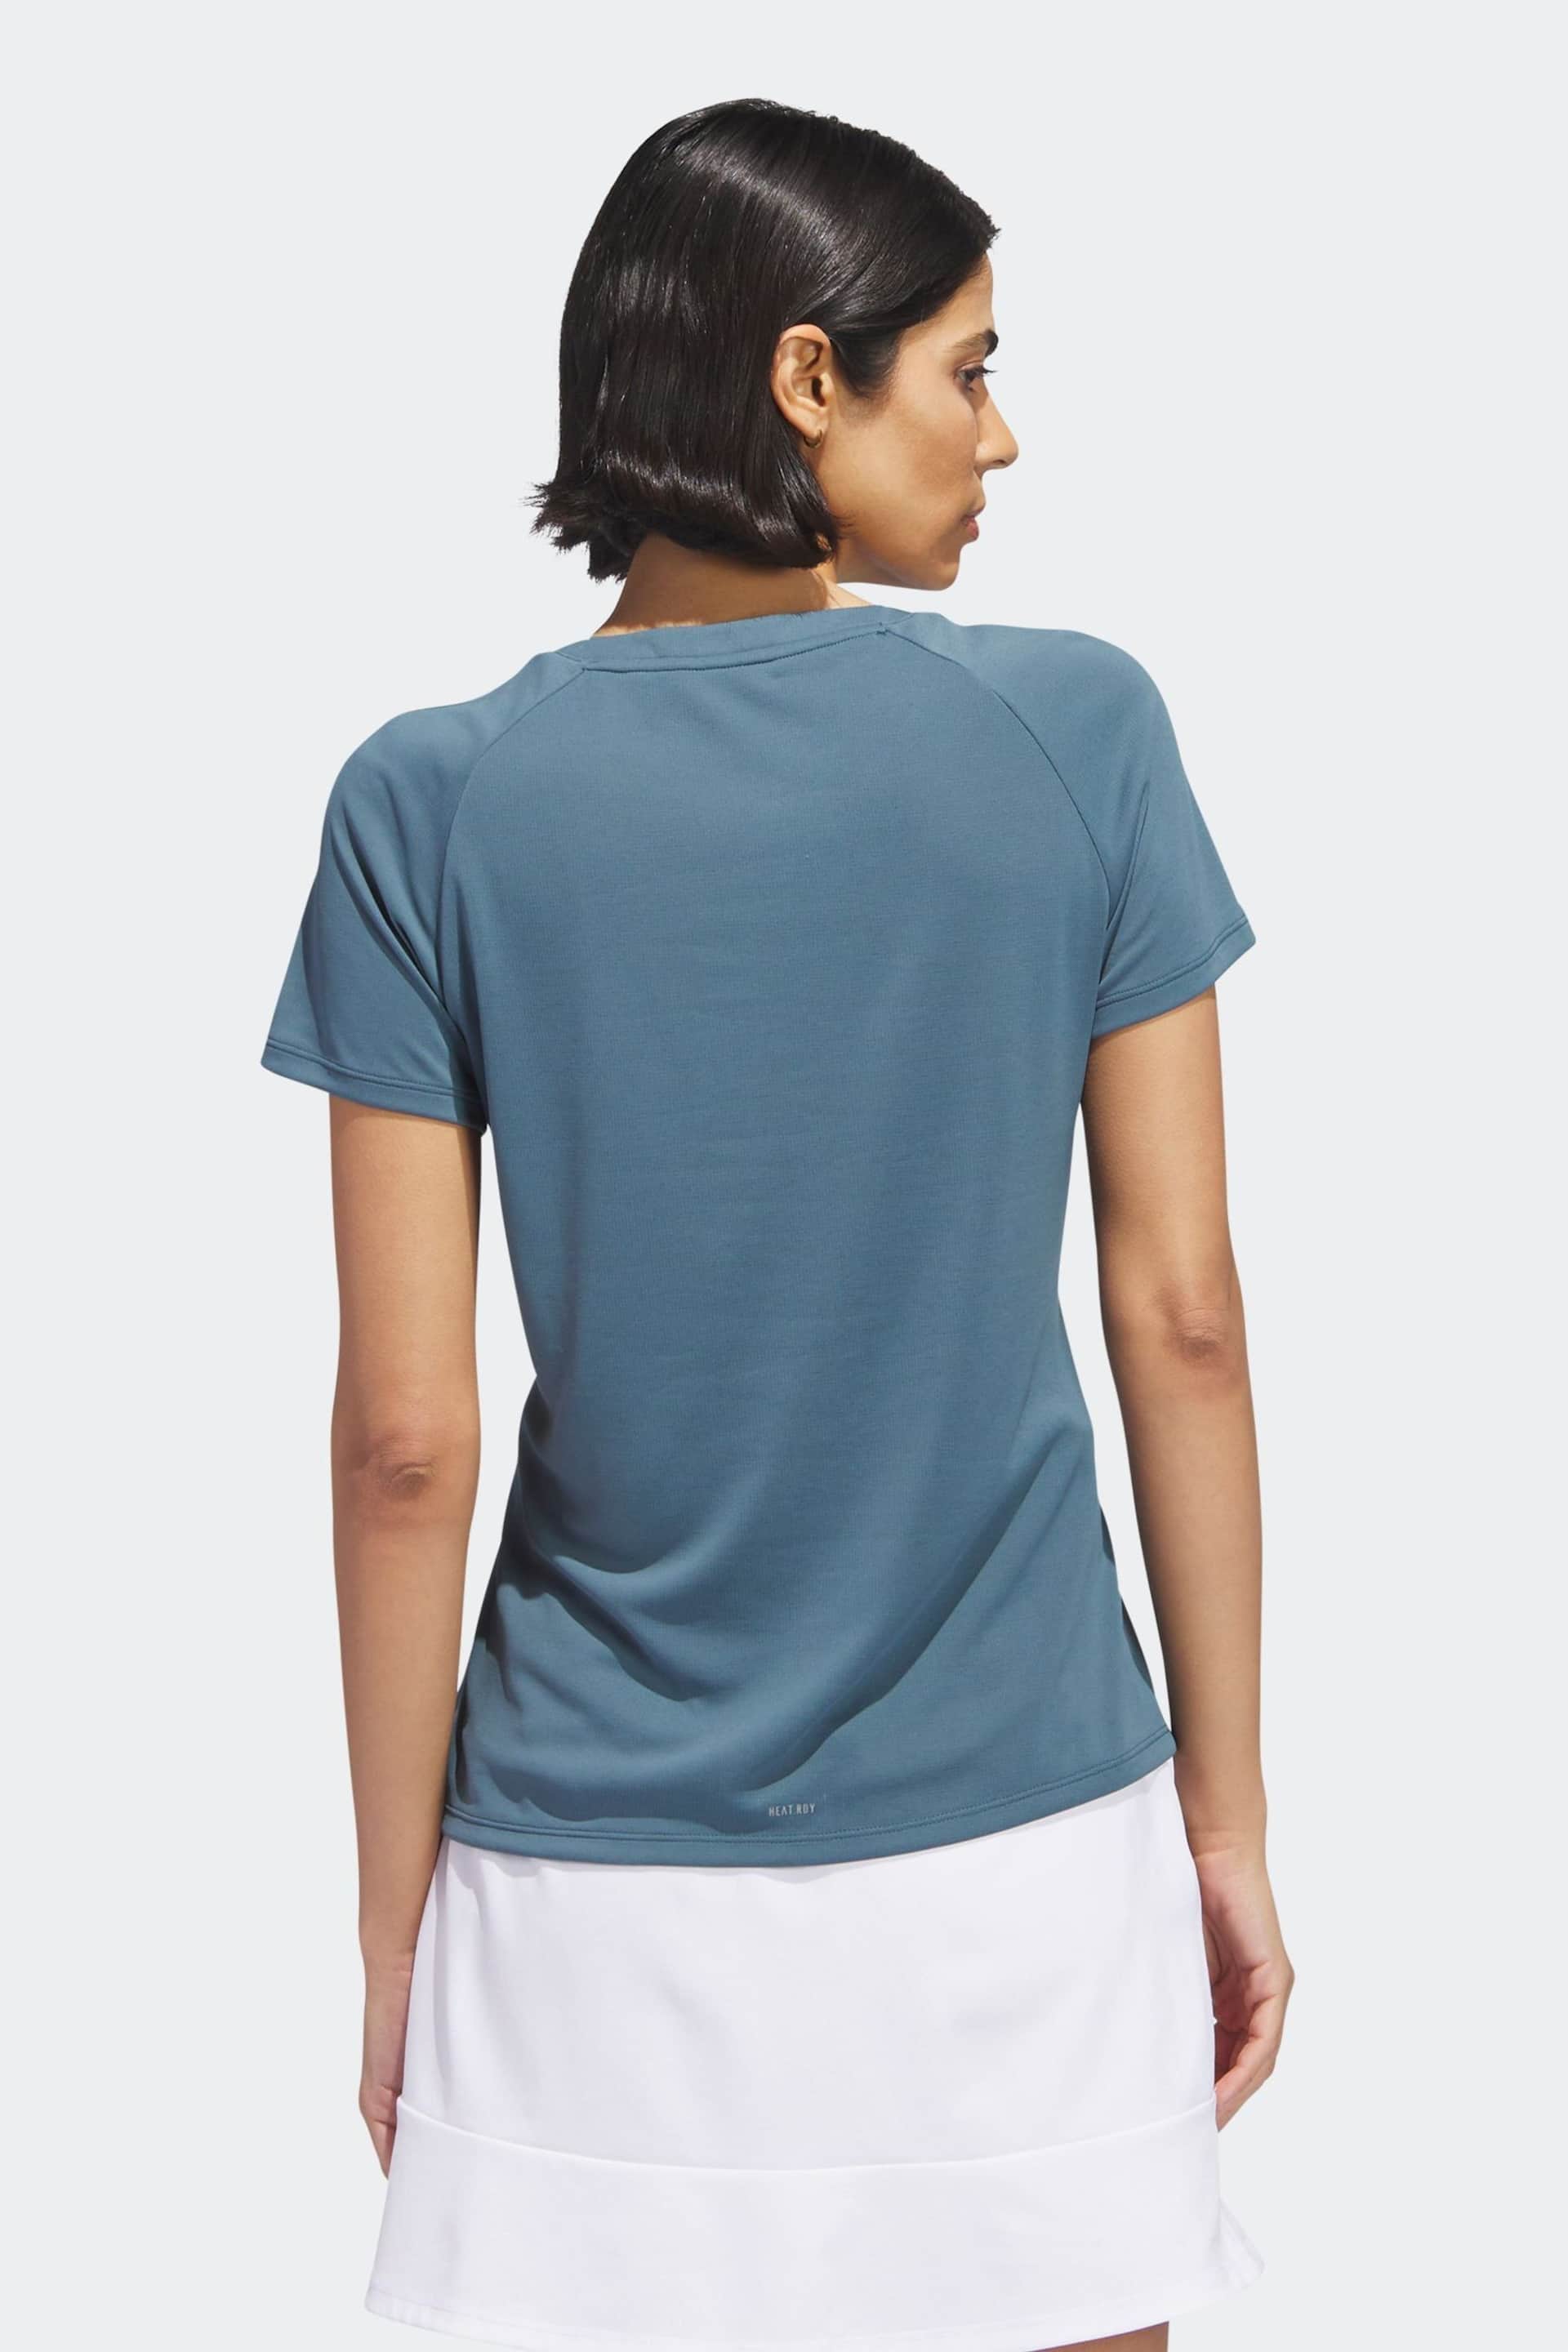 adidas Teal Blue Ultimate365 Tour Heat.rdy V-neck Top - Image 2 of 8